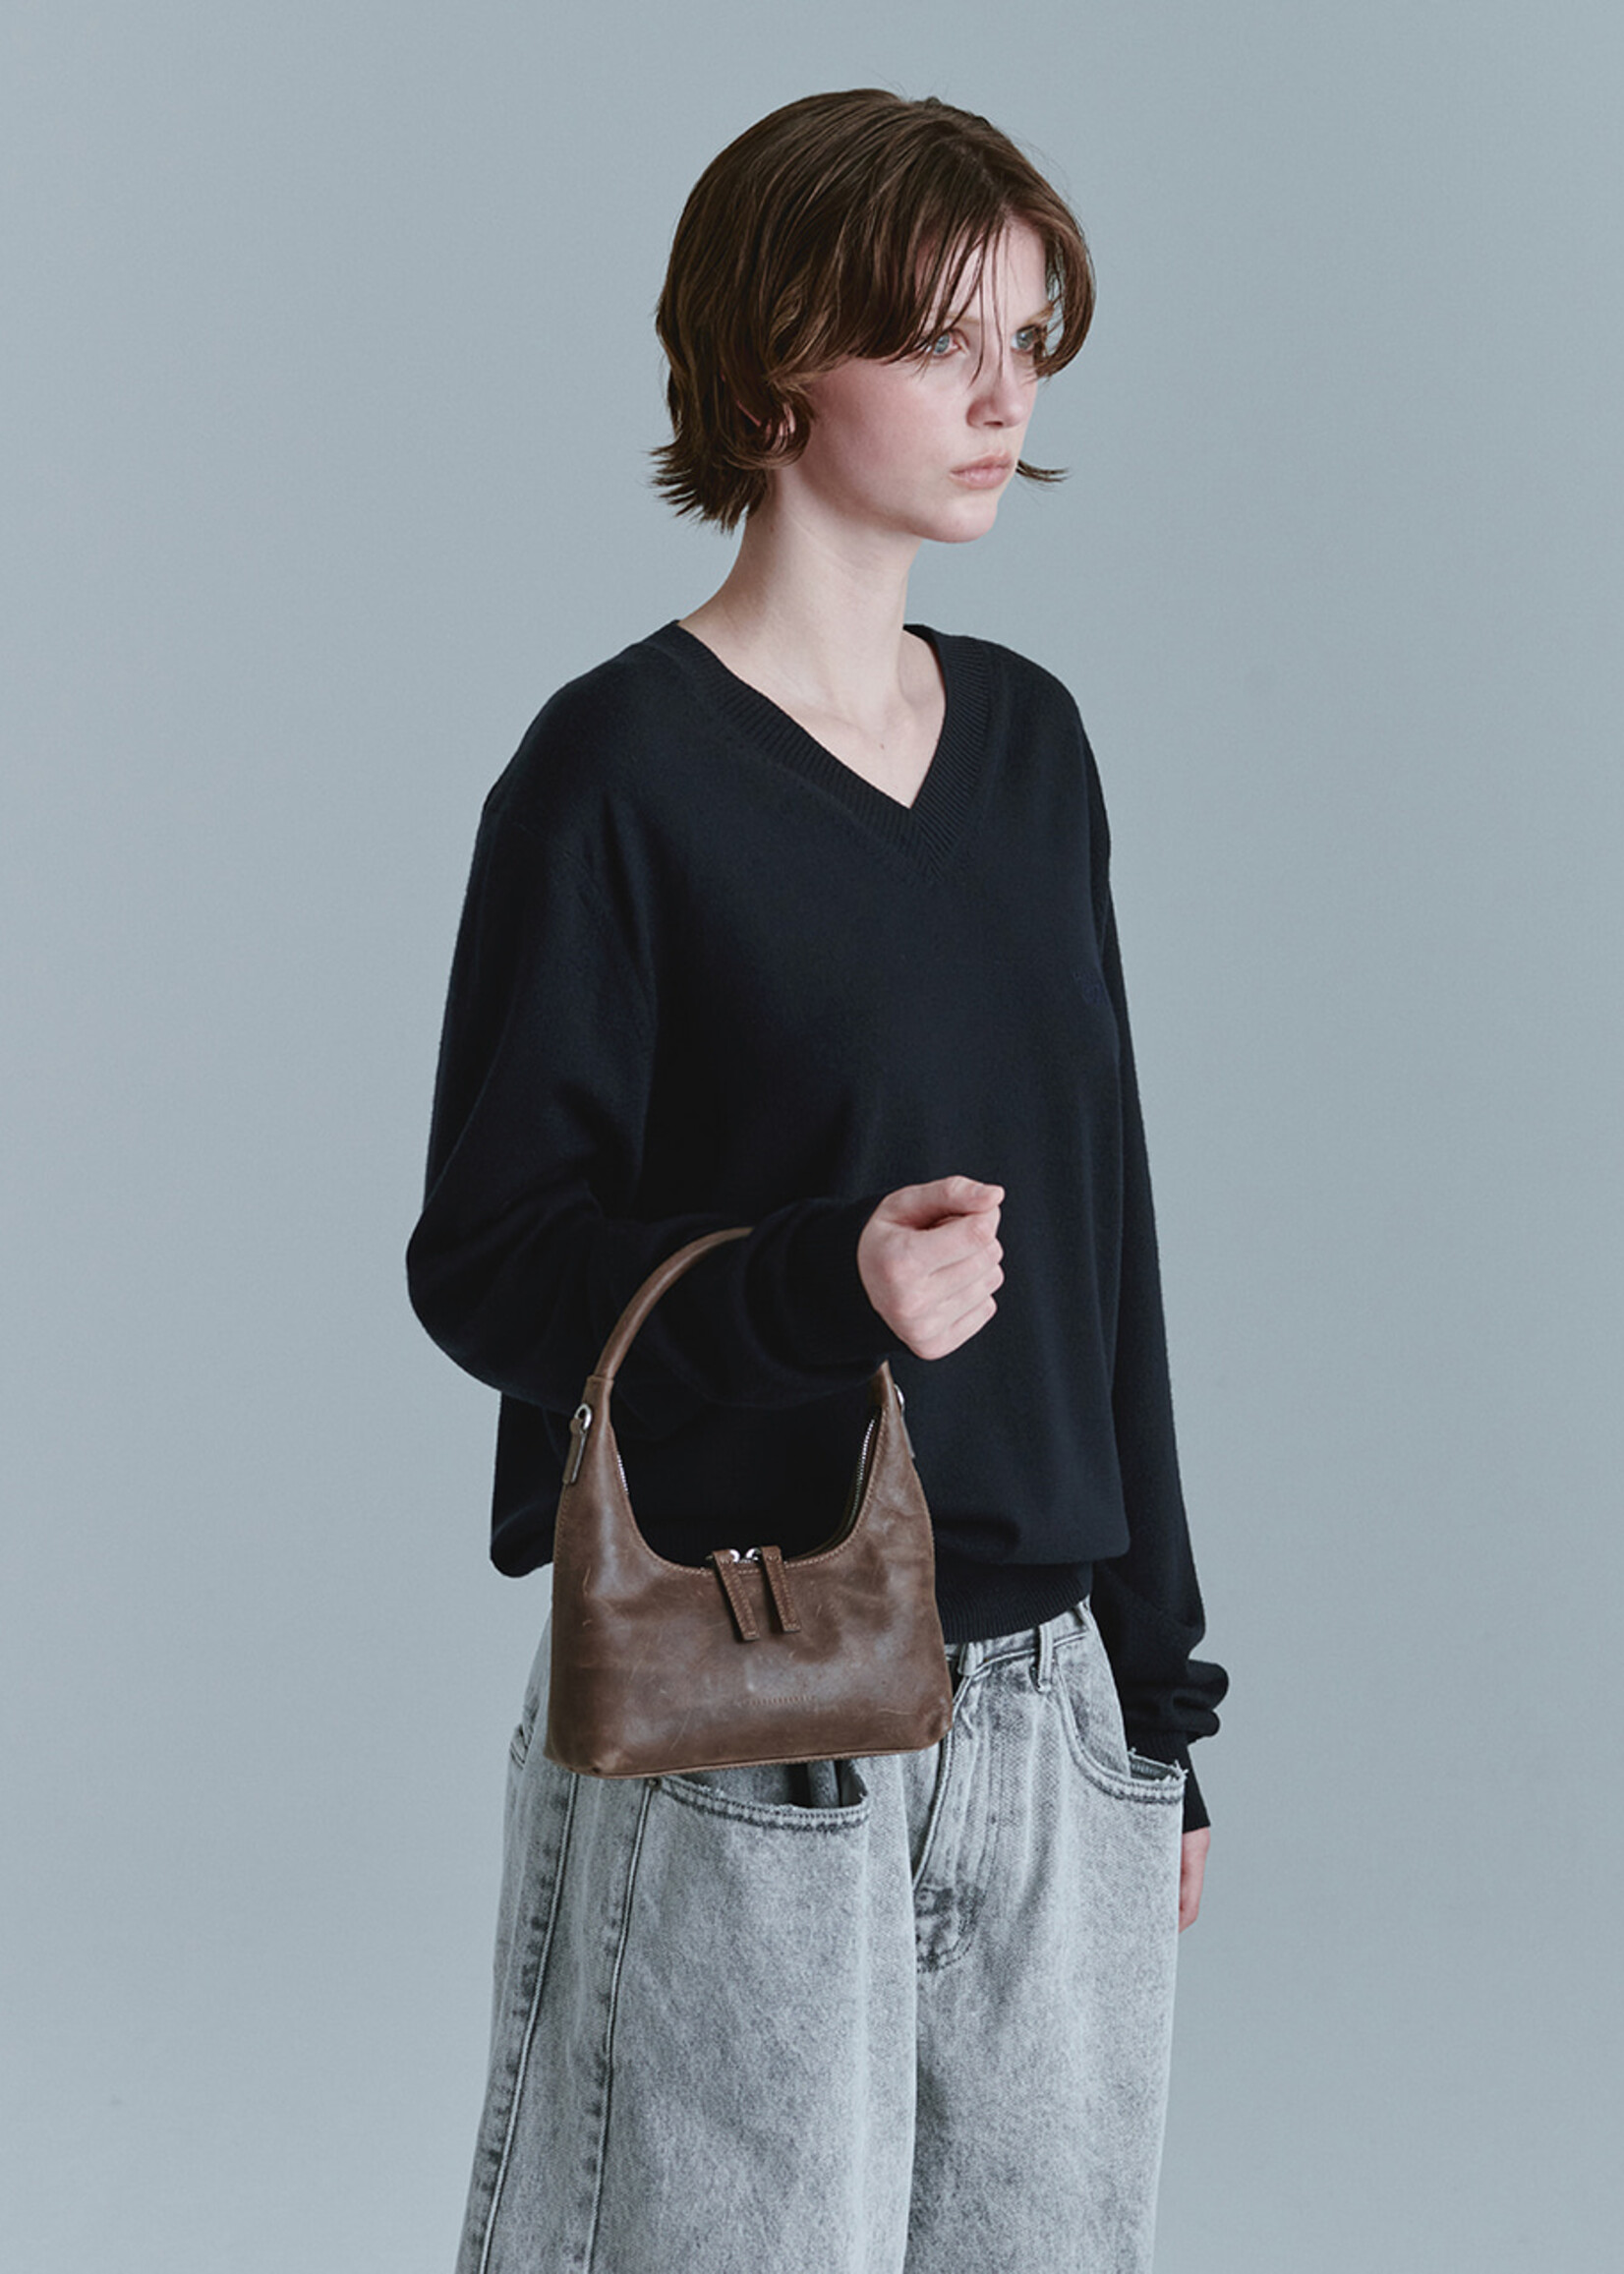 MARGE SHERWOOD Hobo Mini Bag in Washed Brown Leather